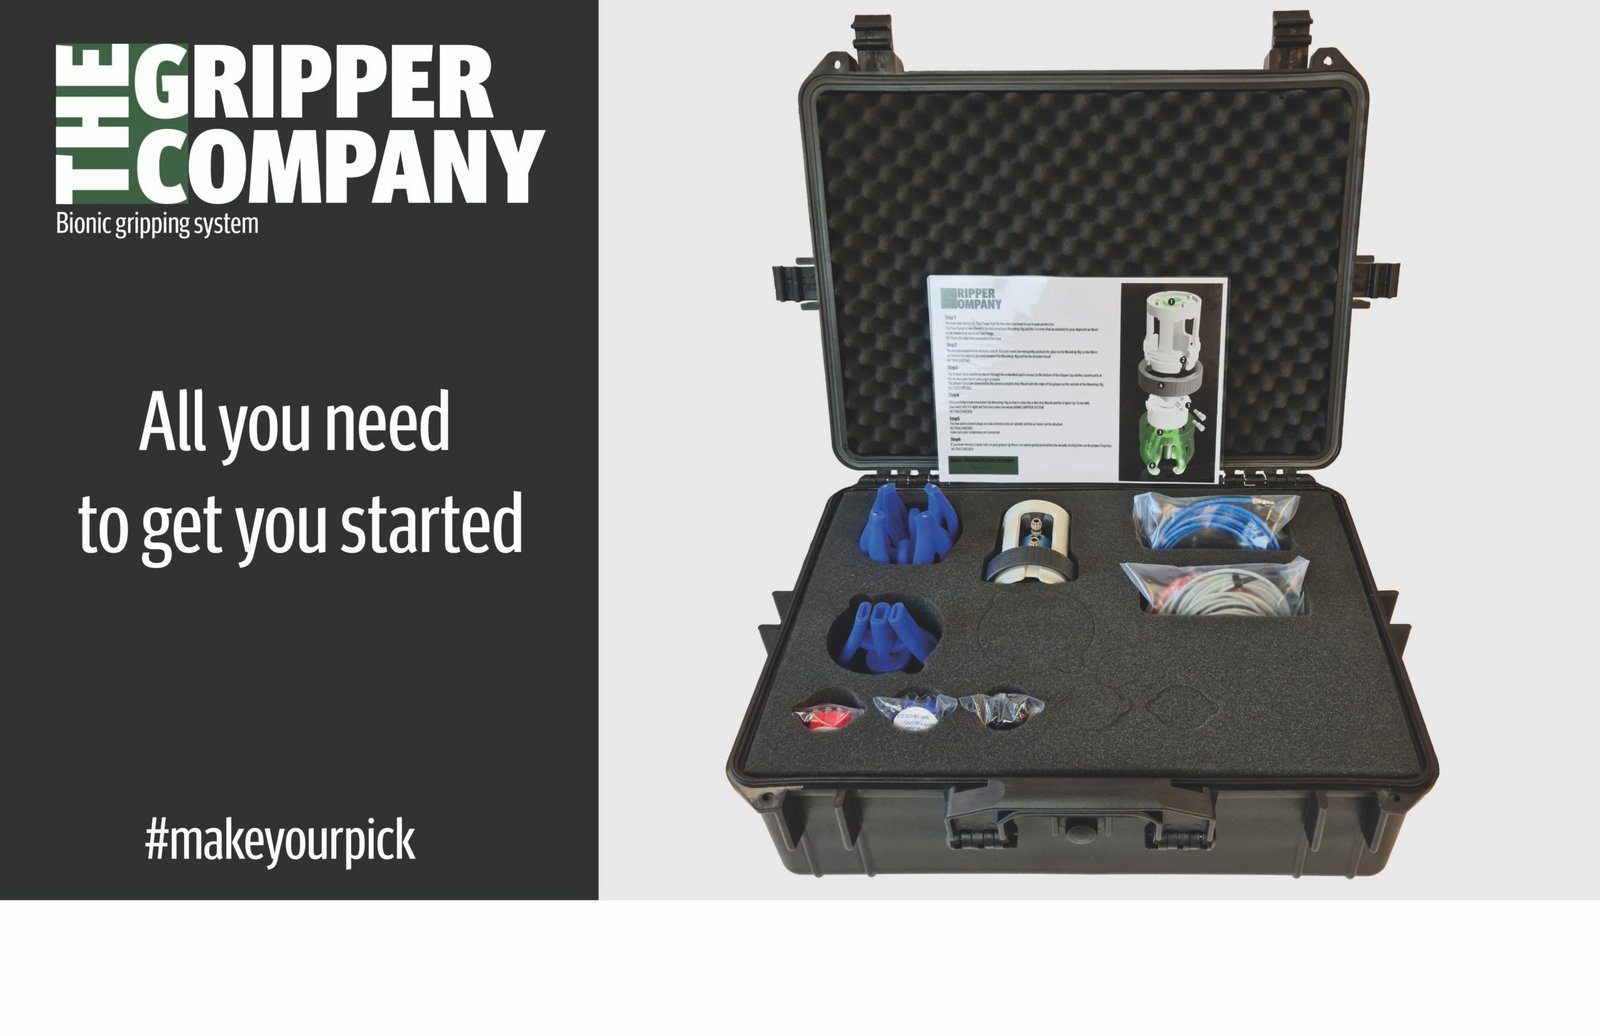 The Gripper Company